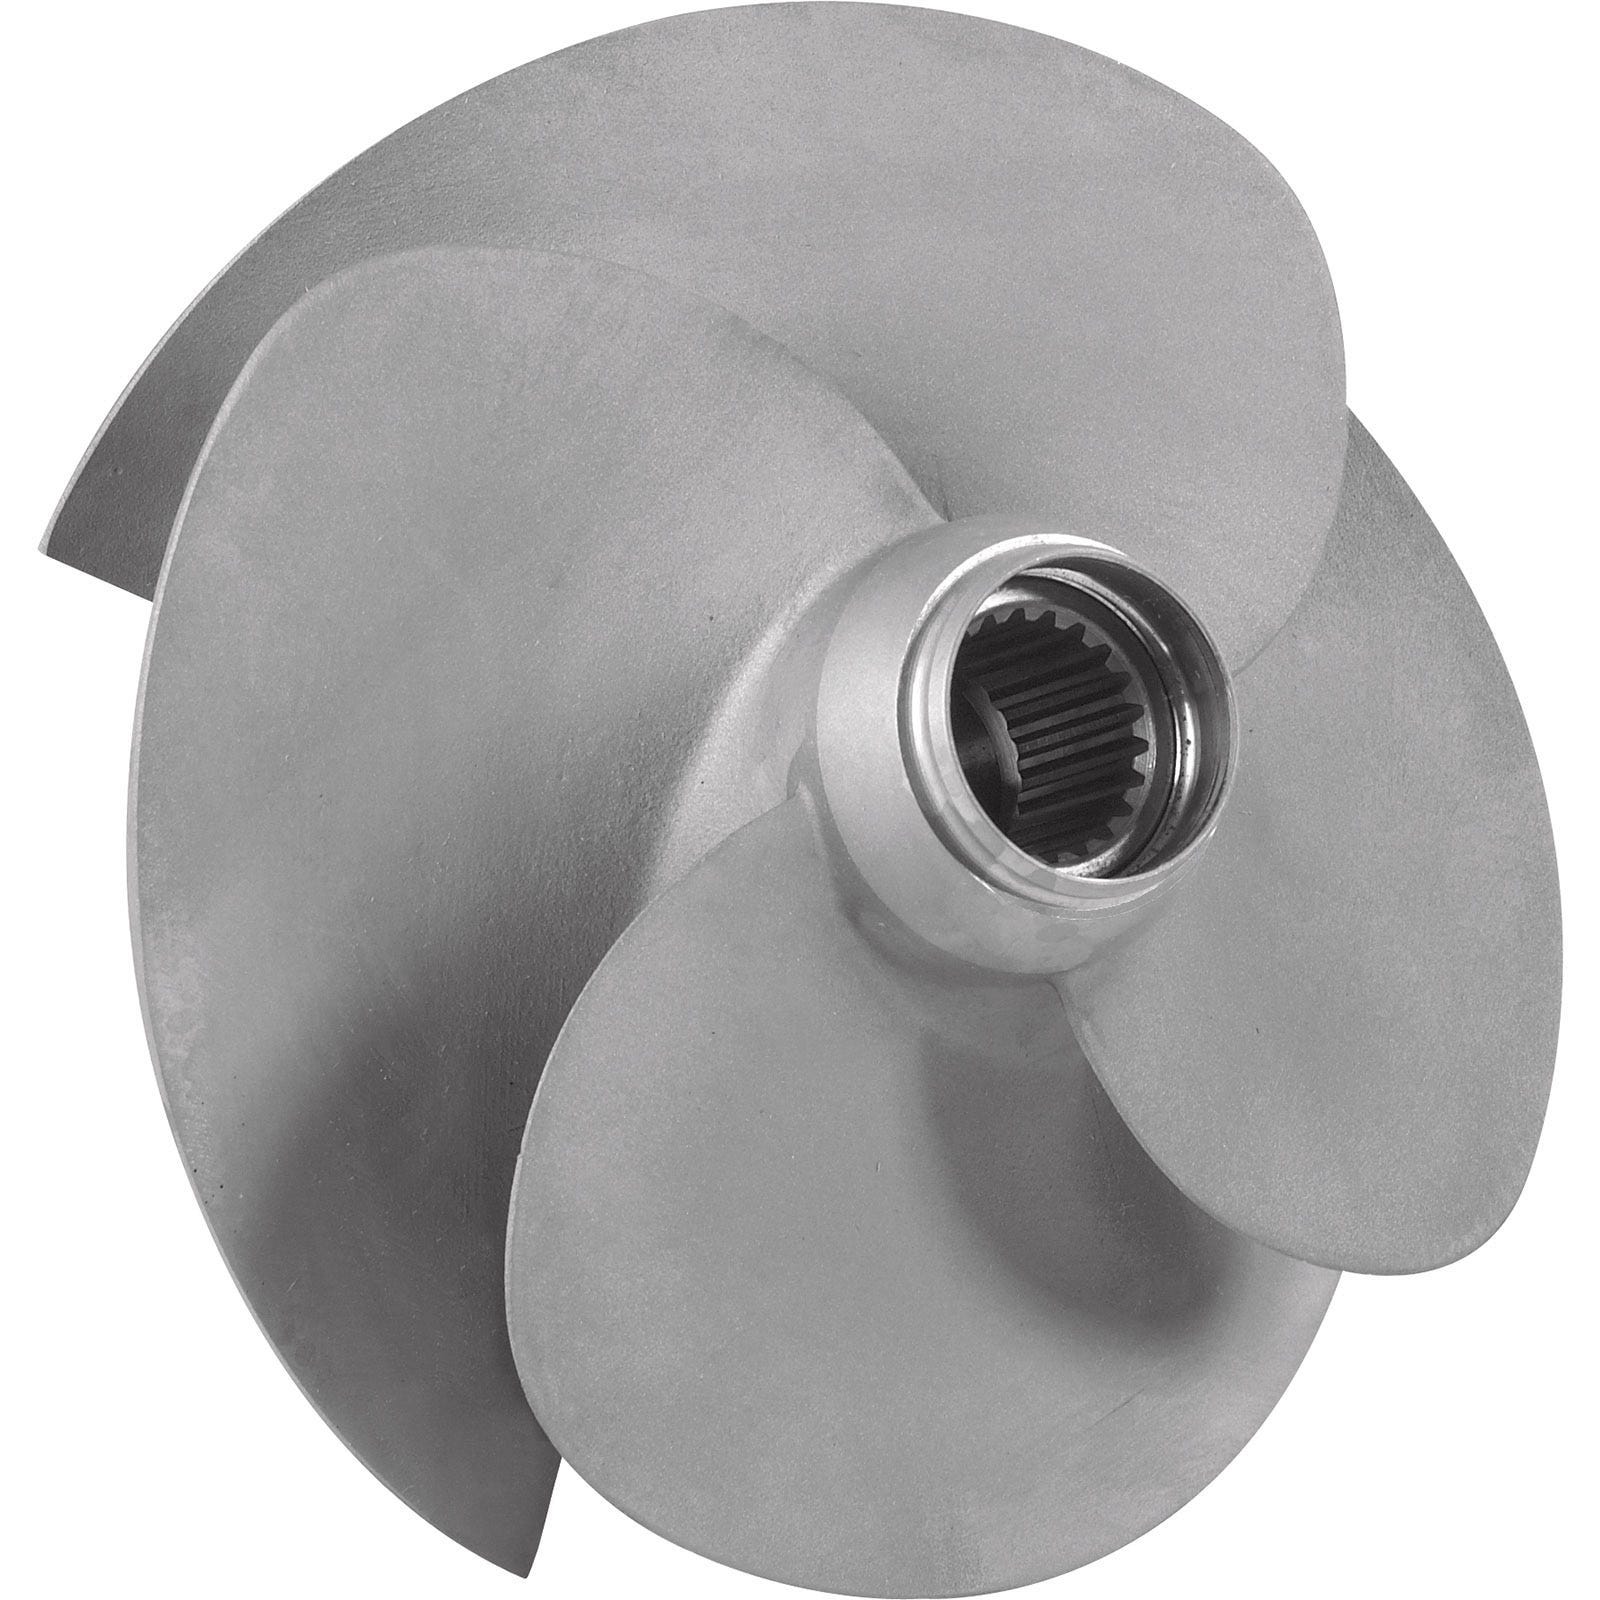 Gti 130 and Gti 155 (2009-2019), Gts 130 (2011-2016), Wake 155 (2011-2017) Impeller - 267000940 - The Parts Lodge